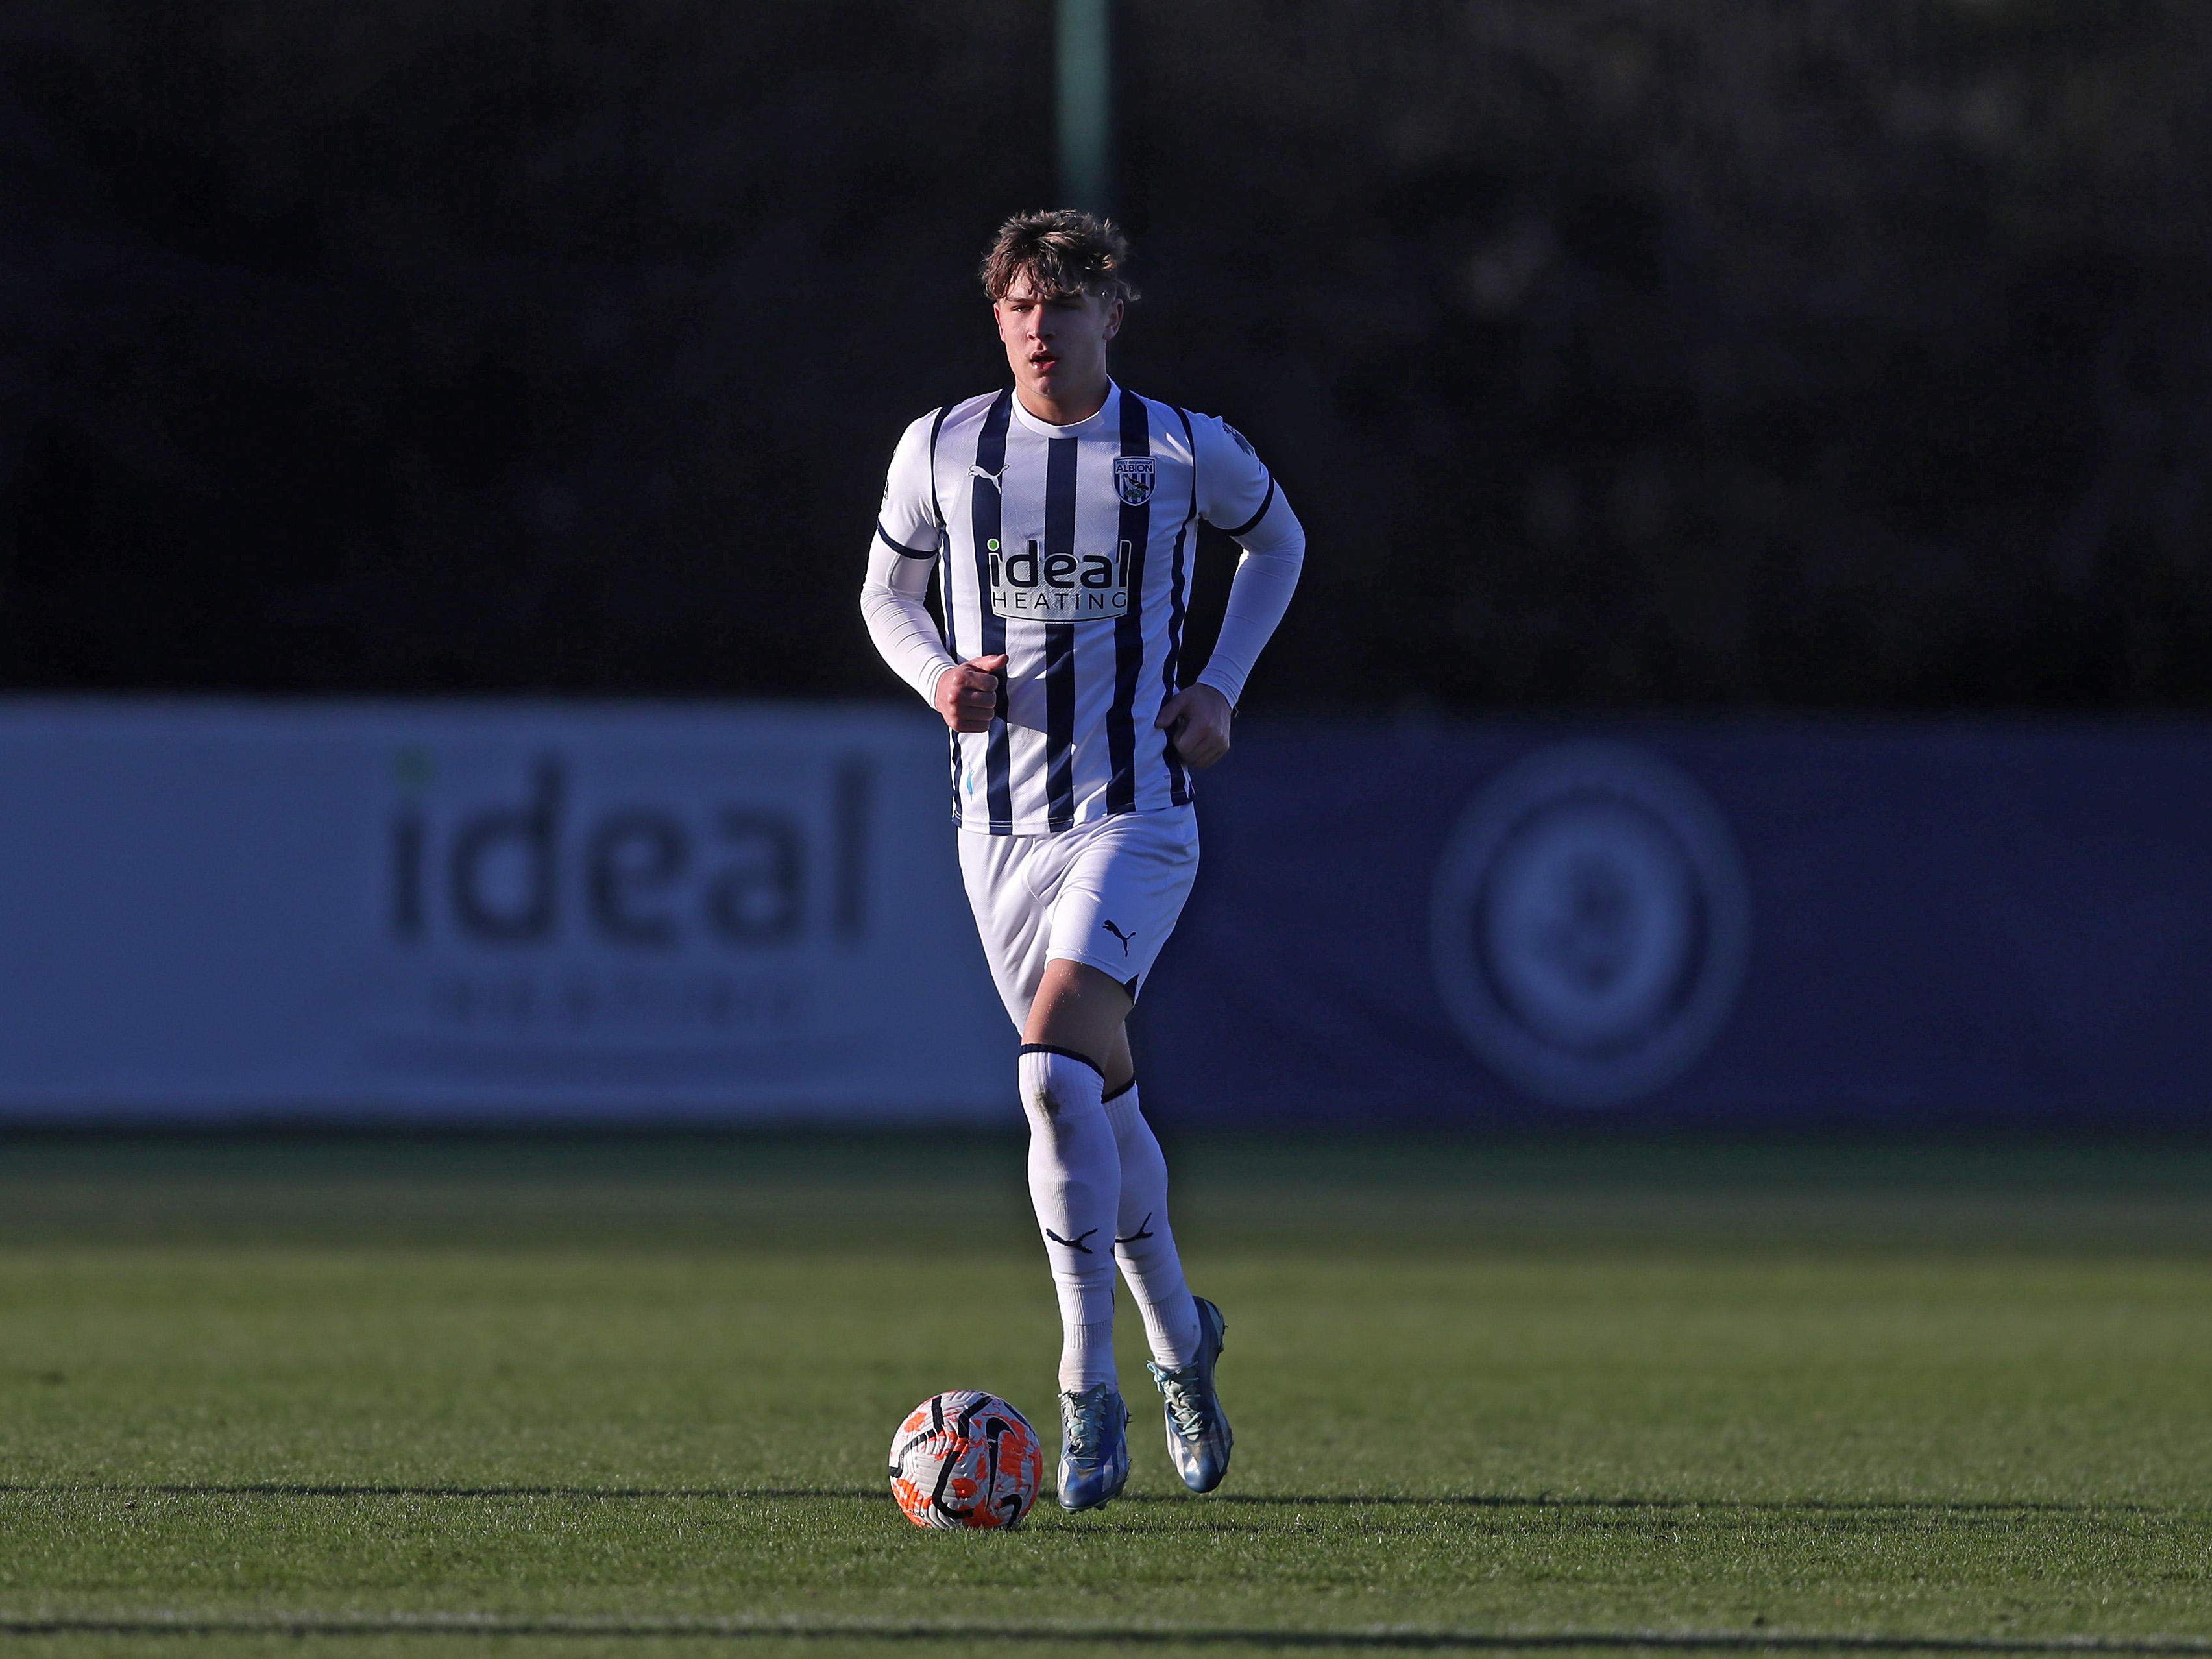 A photo of Albion youngster Cole Deeming, in the 23/24 home kit, in PL2 action at the club's training ground